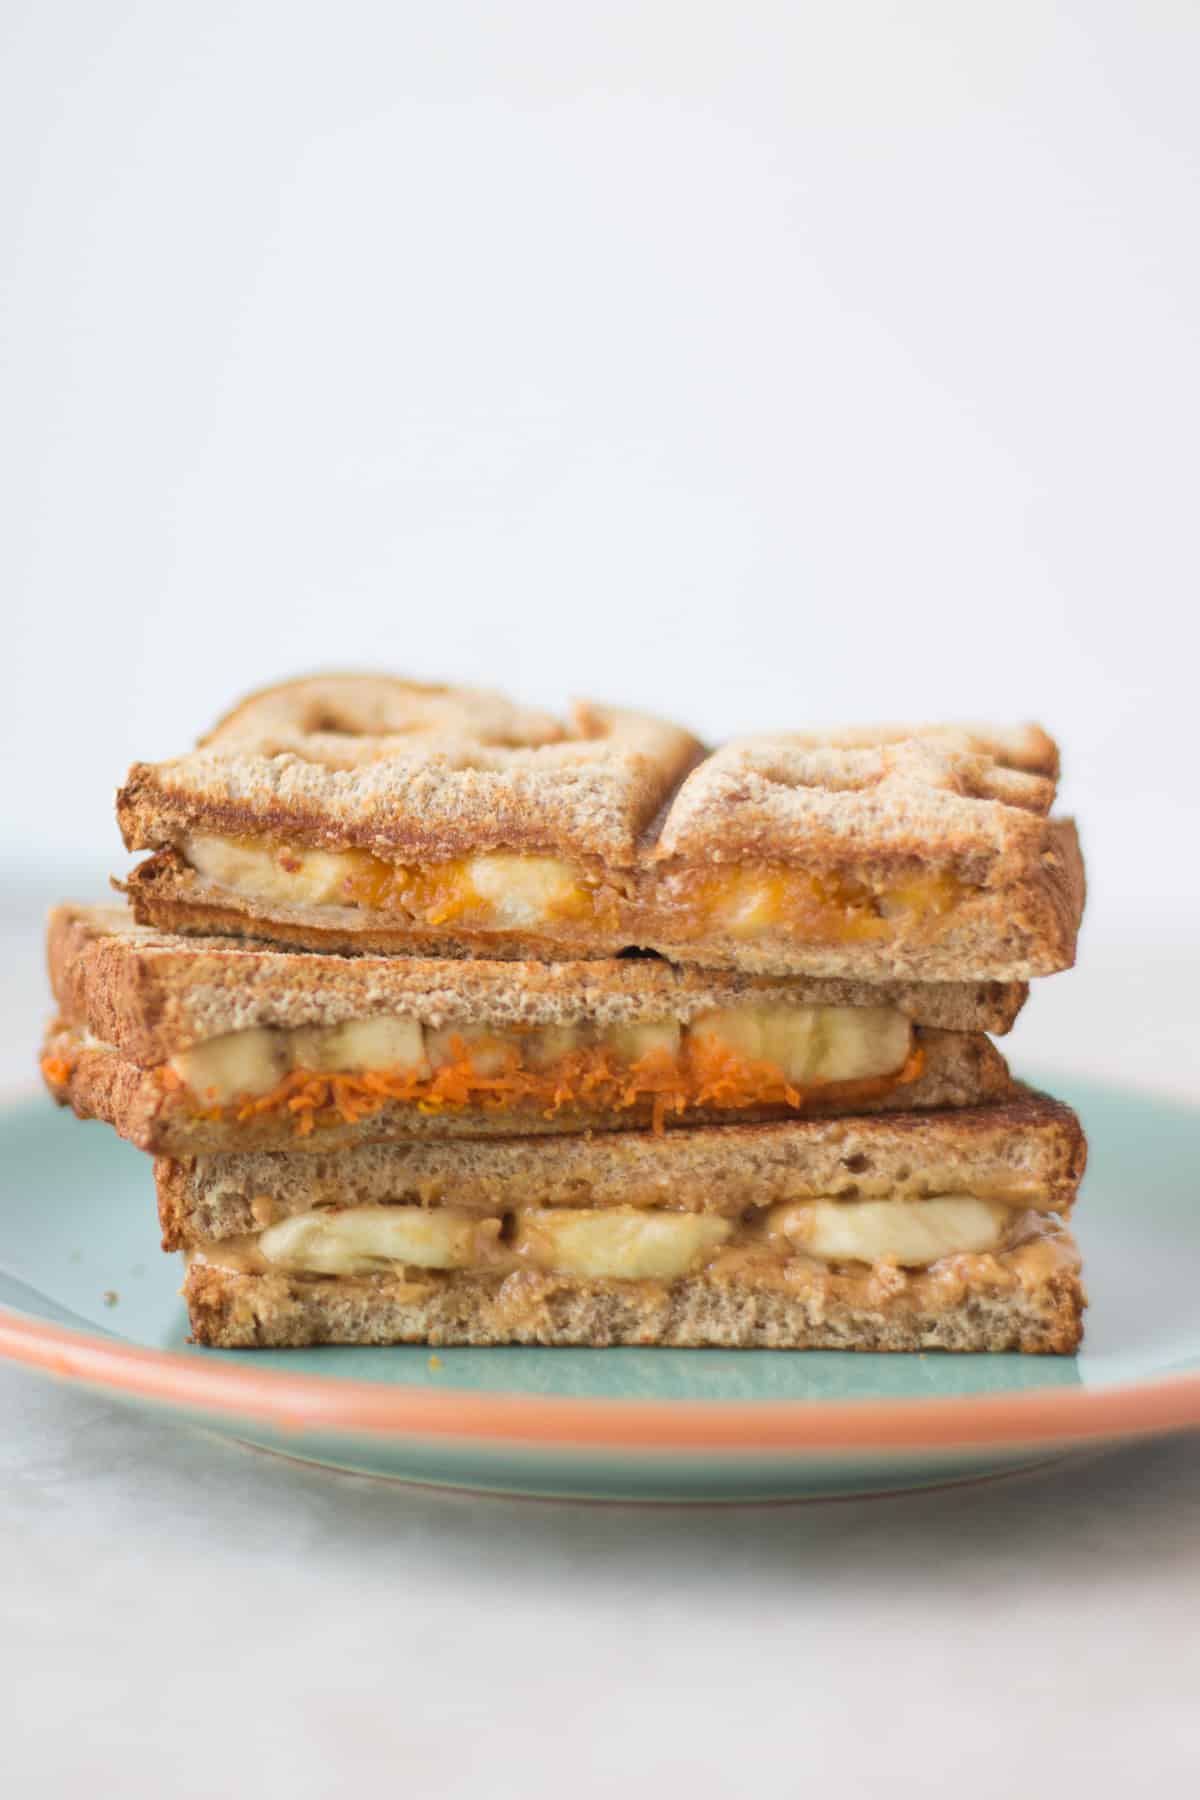 three variations of peanut butter sandwich stacked.